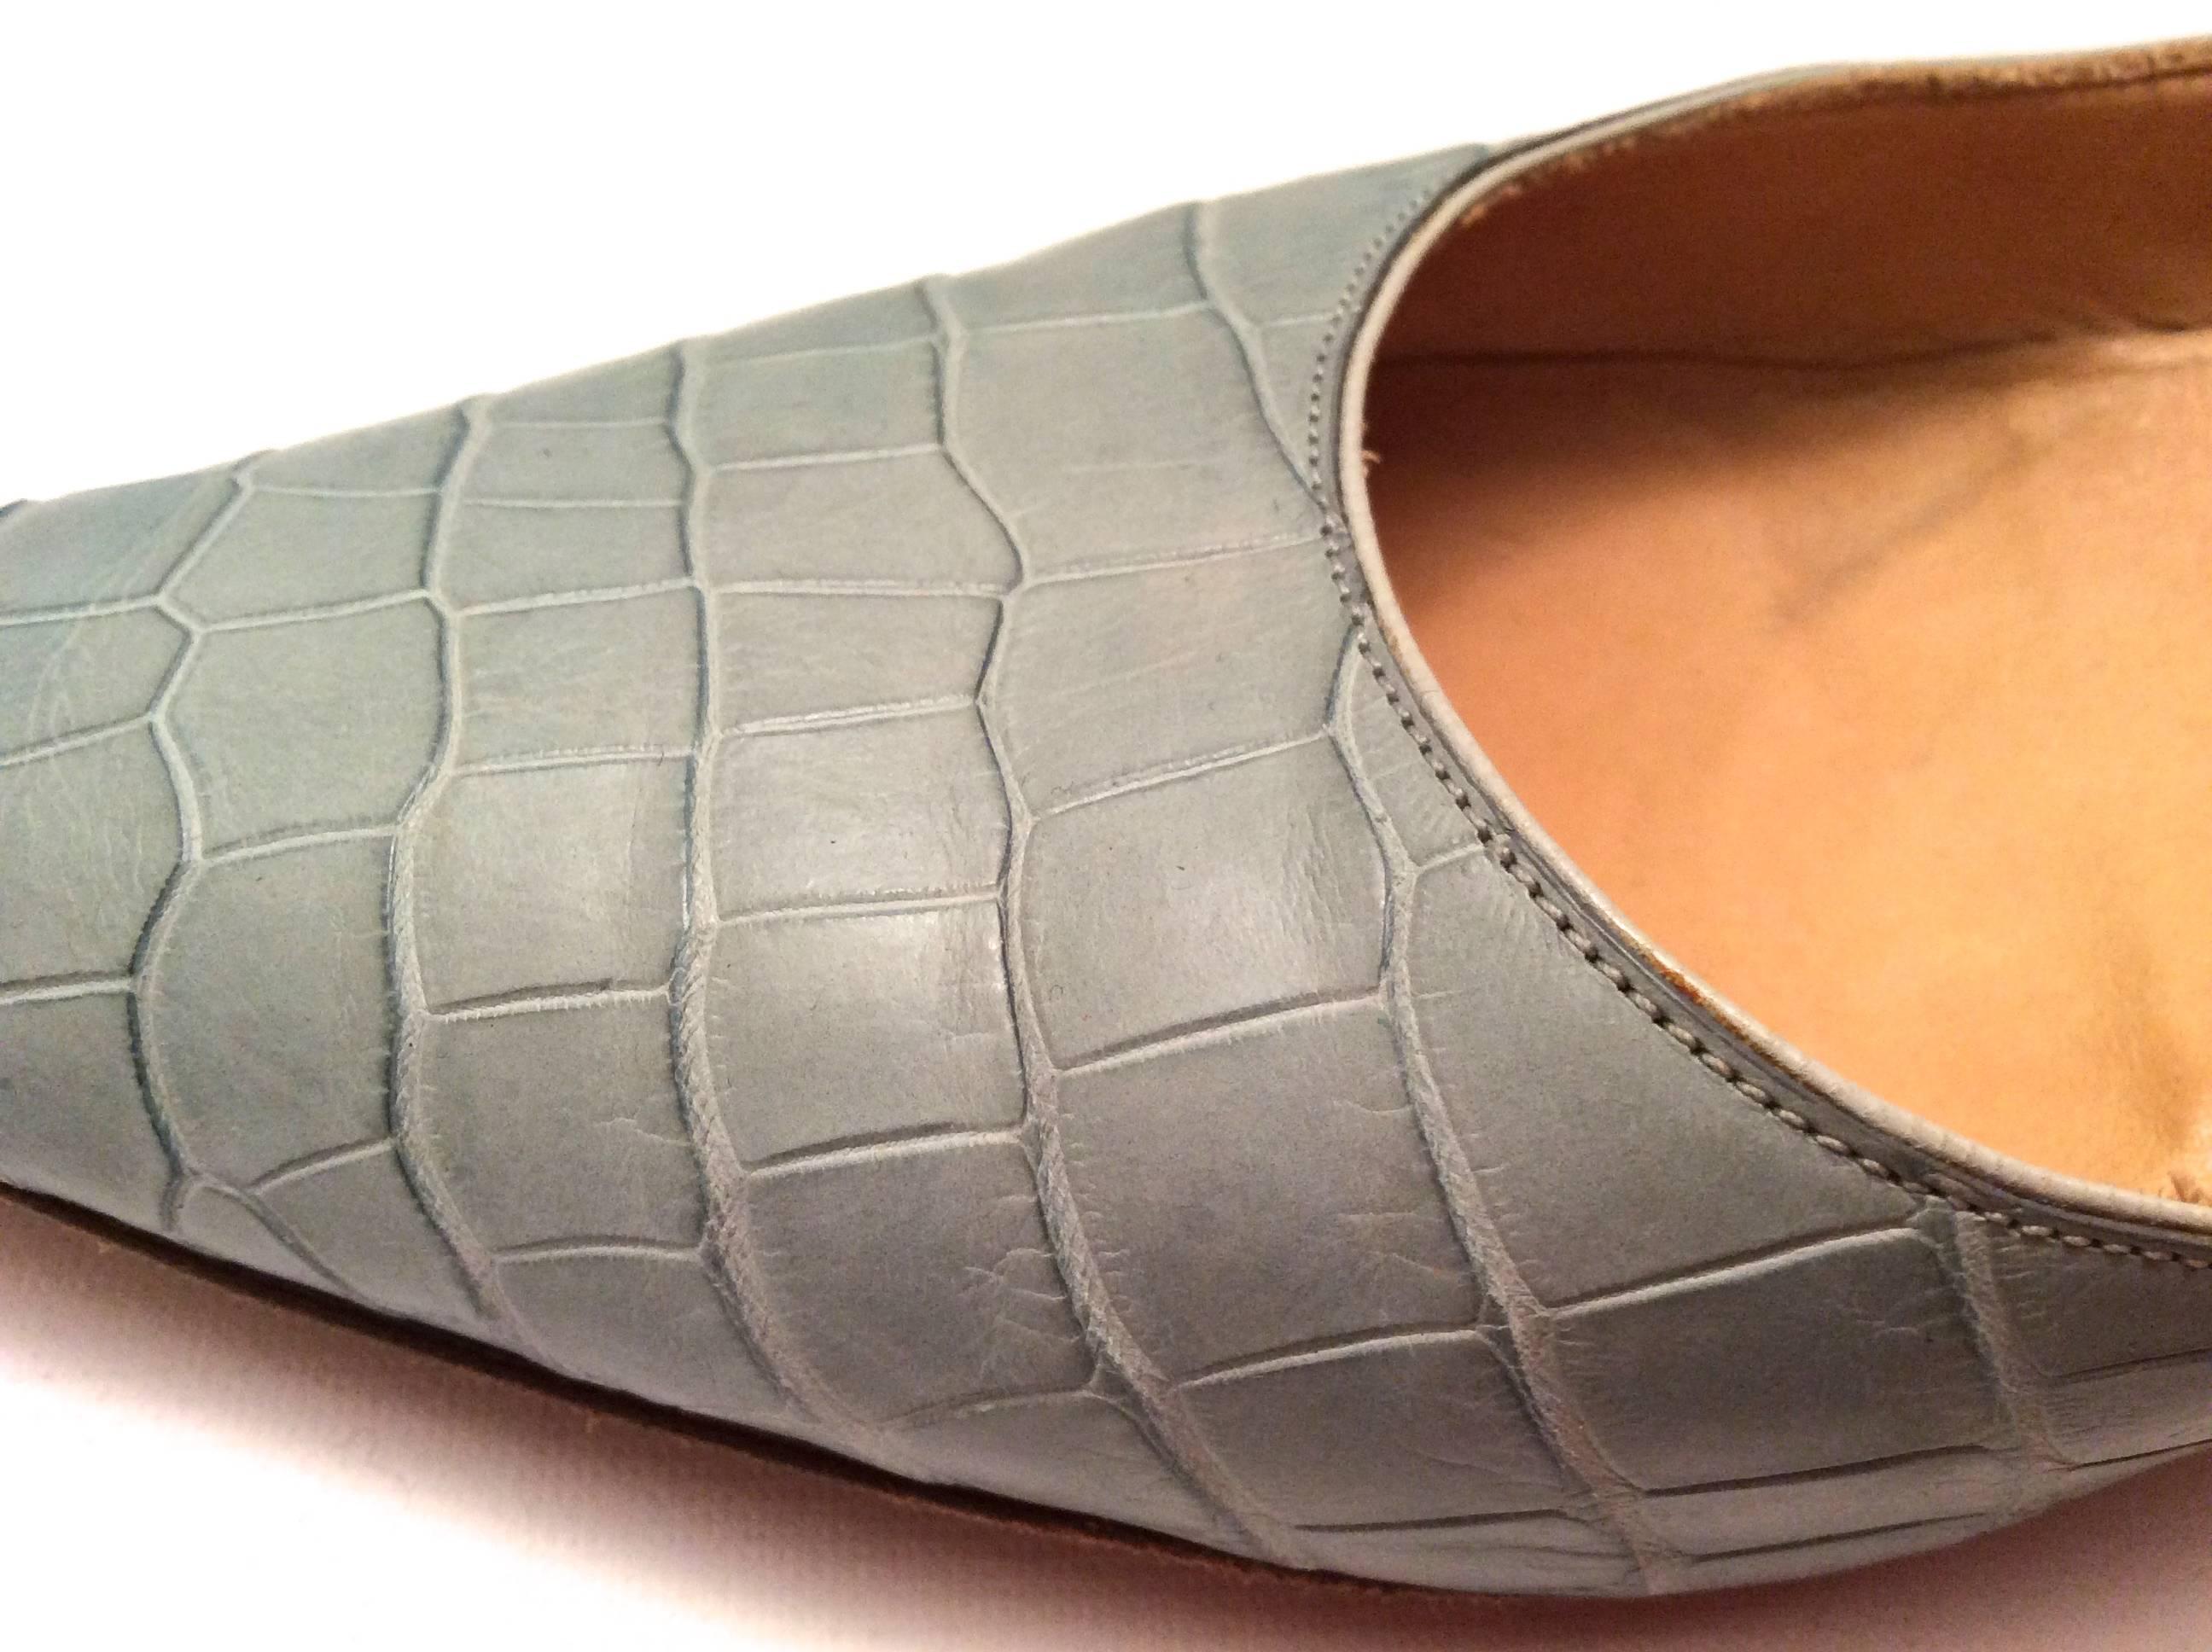 These Asprey Blue Alligator heels are a size 38. They are a matte finish light  blue / indigo tone. They are crafted with gorgeous alligator skin by the craftsmen at Asprey. They are lightly used with light wear to the bottom of the shoe. The